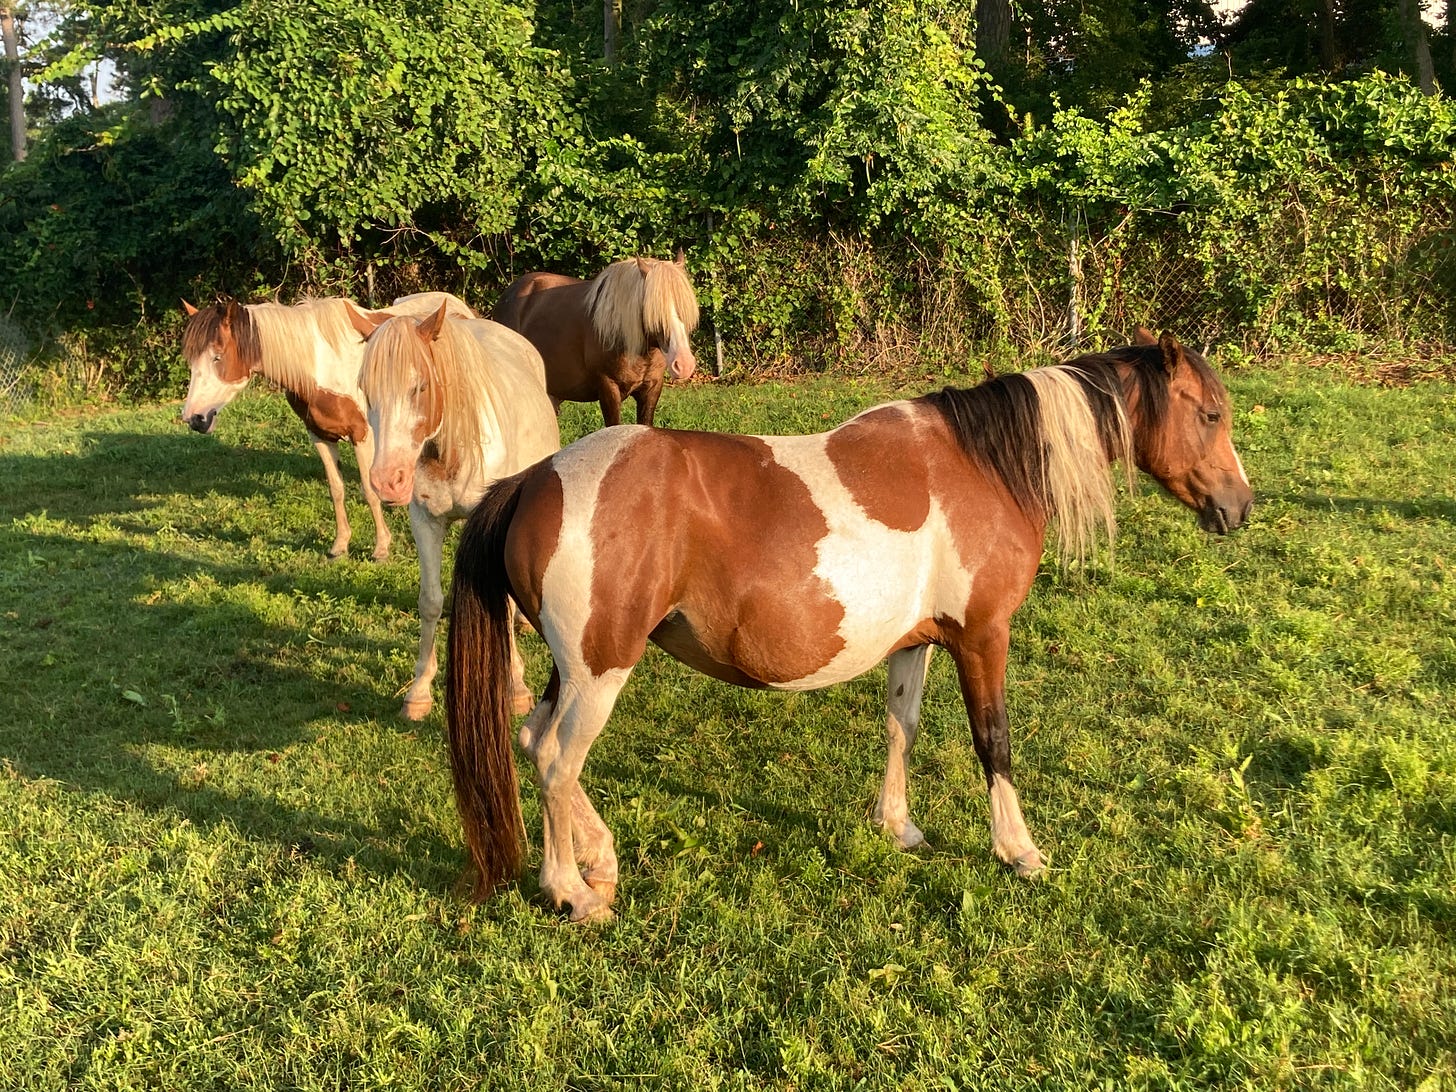 Four ponies in a field with trees in the background. The frontmost pony is brown with white markings and a blonde streak in its mane. The hindmost pony is mostly brown with a fully blonde mane hanging in his eyes. 